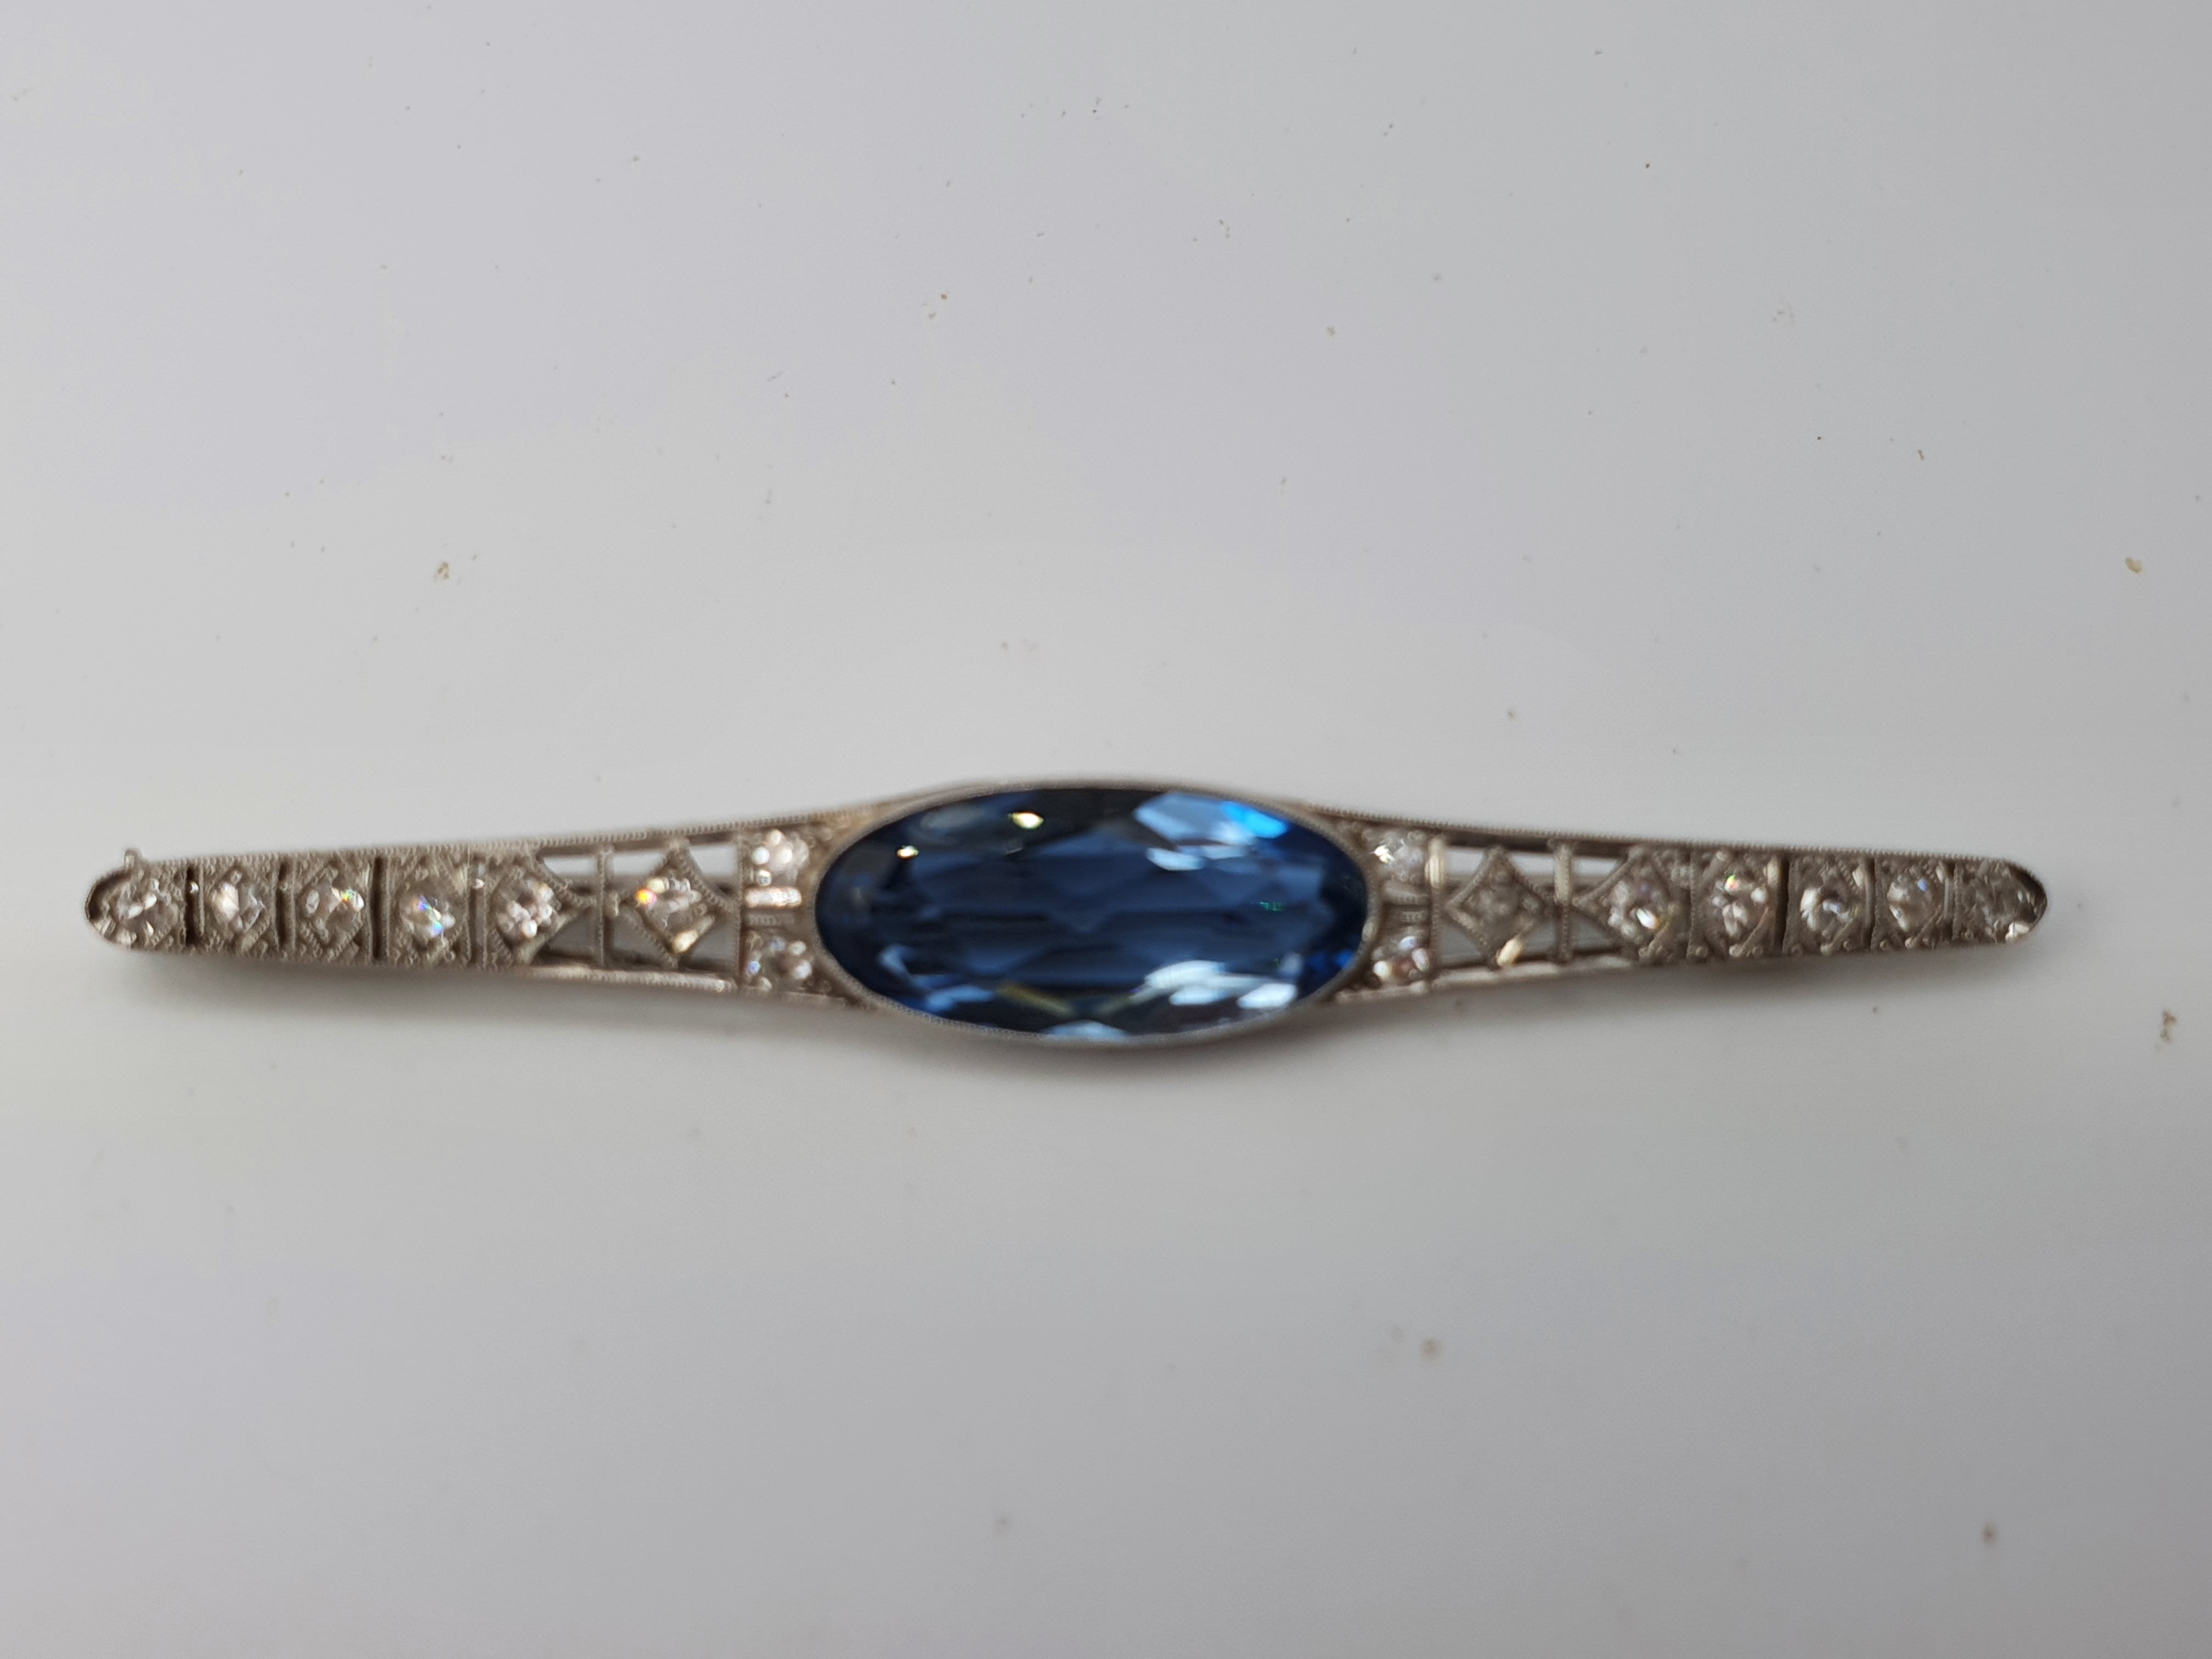 Antique: c(1930) Art Deco Platinum;  Swiss Cut Diamond; Faceted Iolites  Brooch by Gregory & Sheenan:  Rio De Janeiro - Original Box; Magnificent Condition

Gregory & Sheenan were originally part of the Cartier stable and set up independently in the